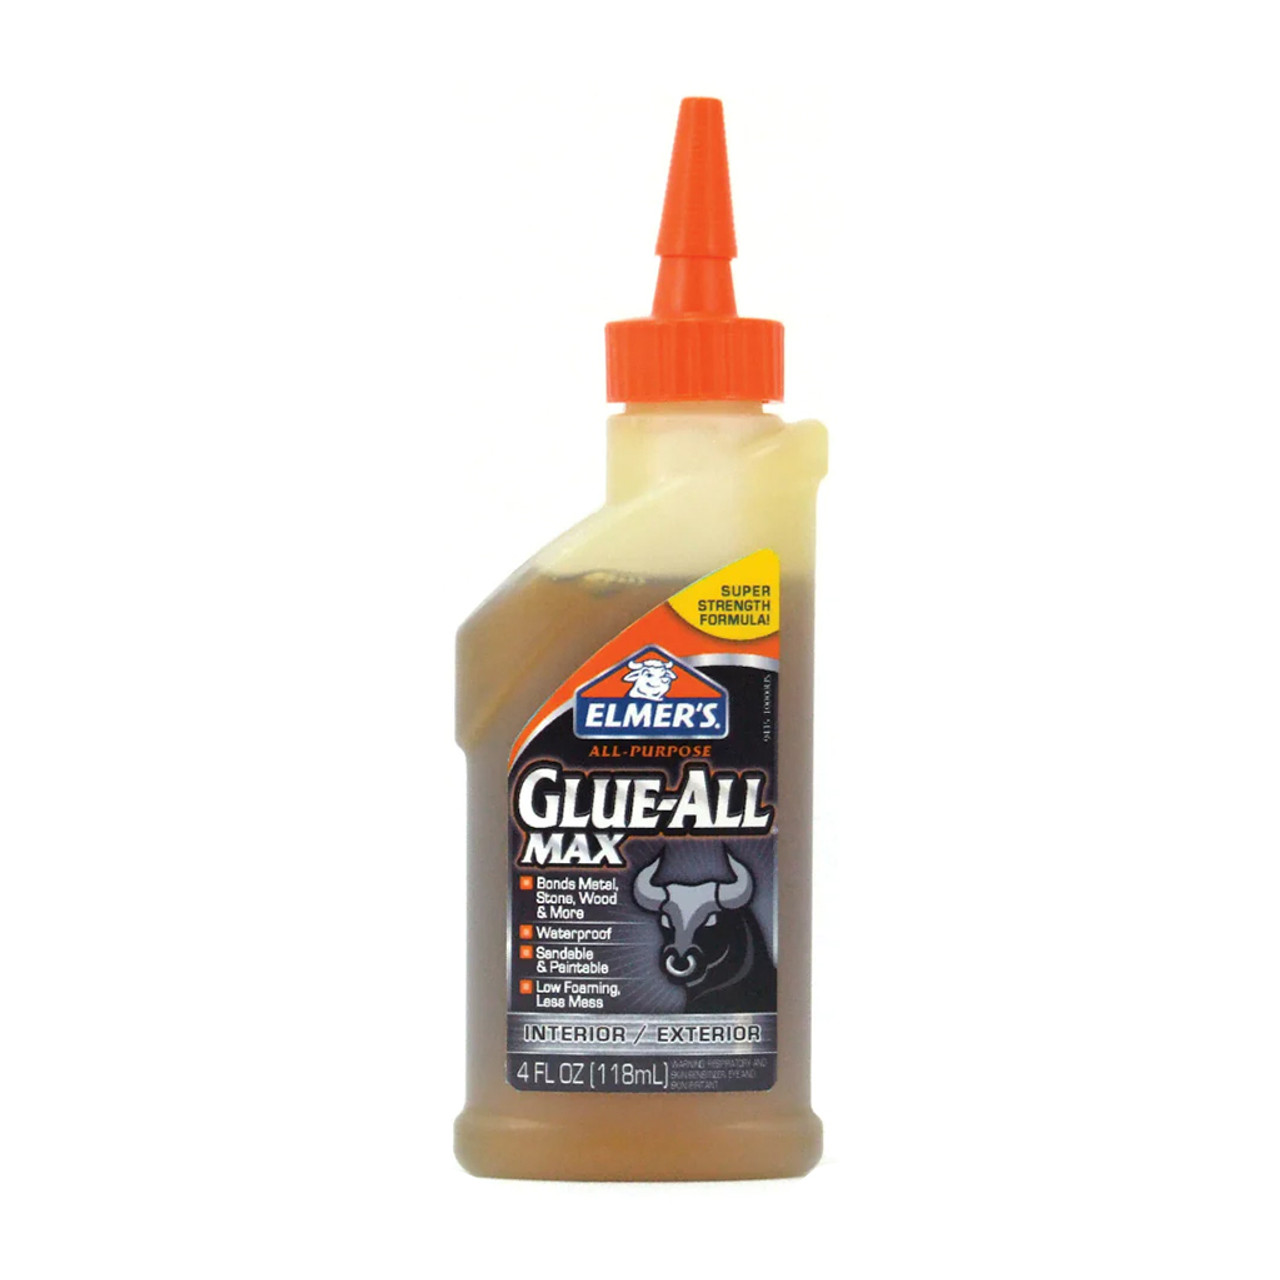 Powerful elmers gallon of glue For Strength 